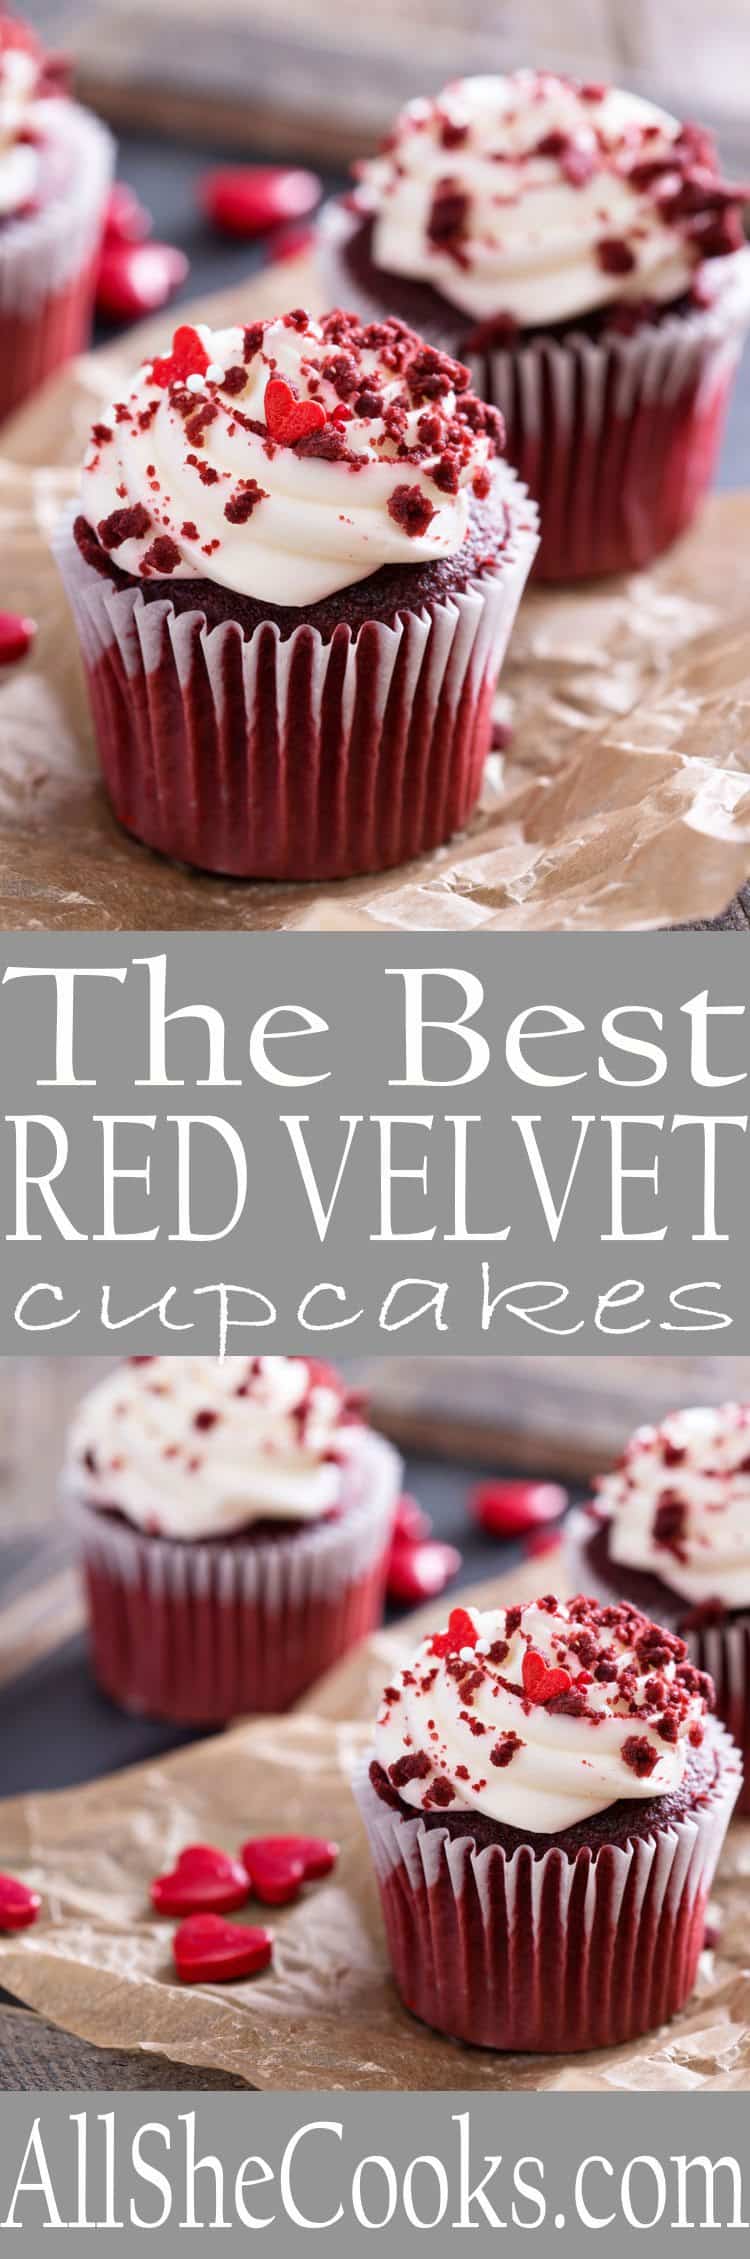 Whip up a batch of the Best Red Velvet Cupcakes to celebrate with the best Valentine's Day cupcakes.